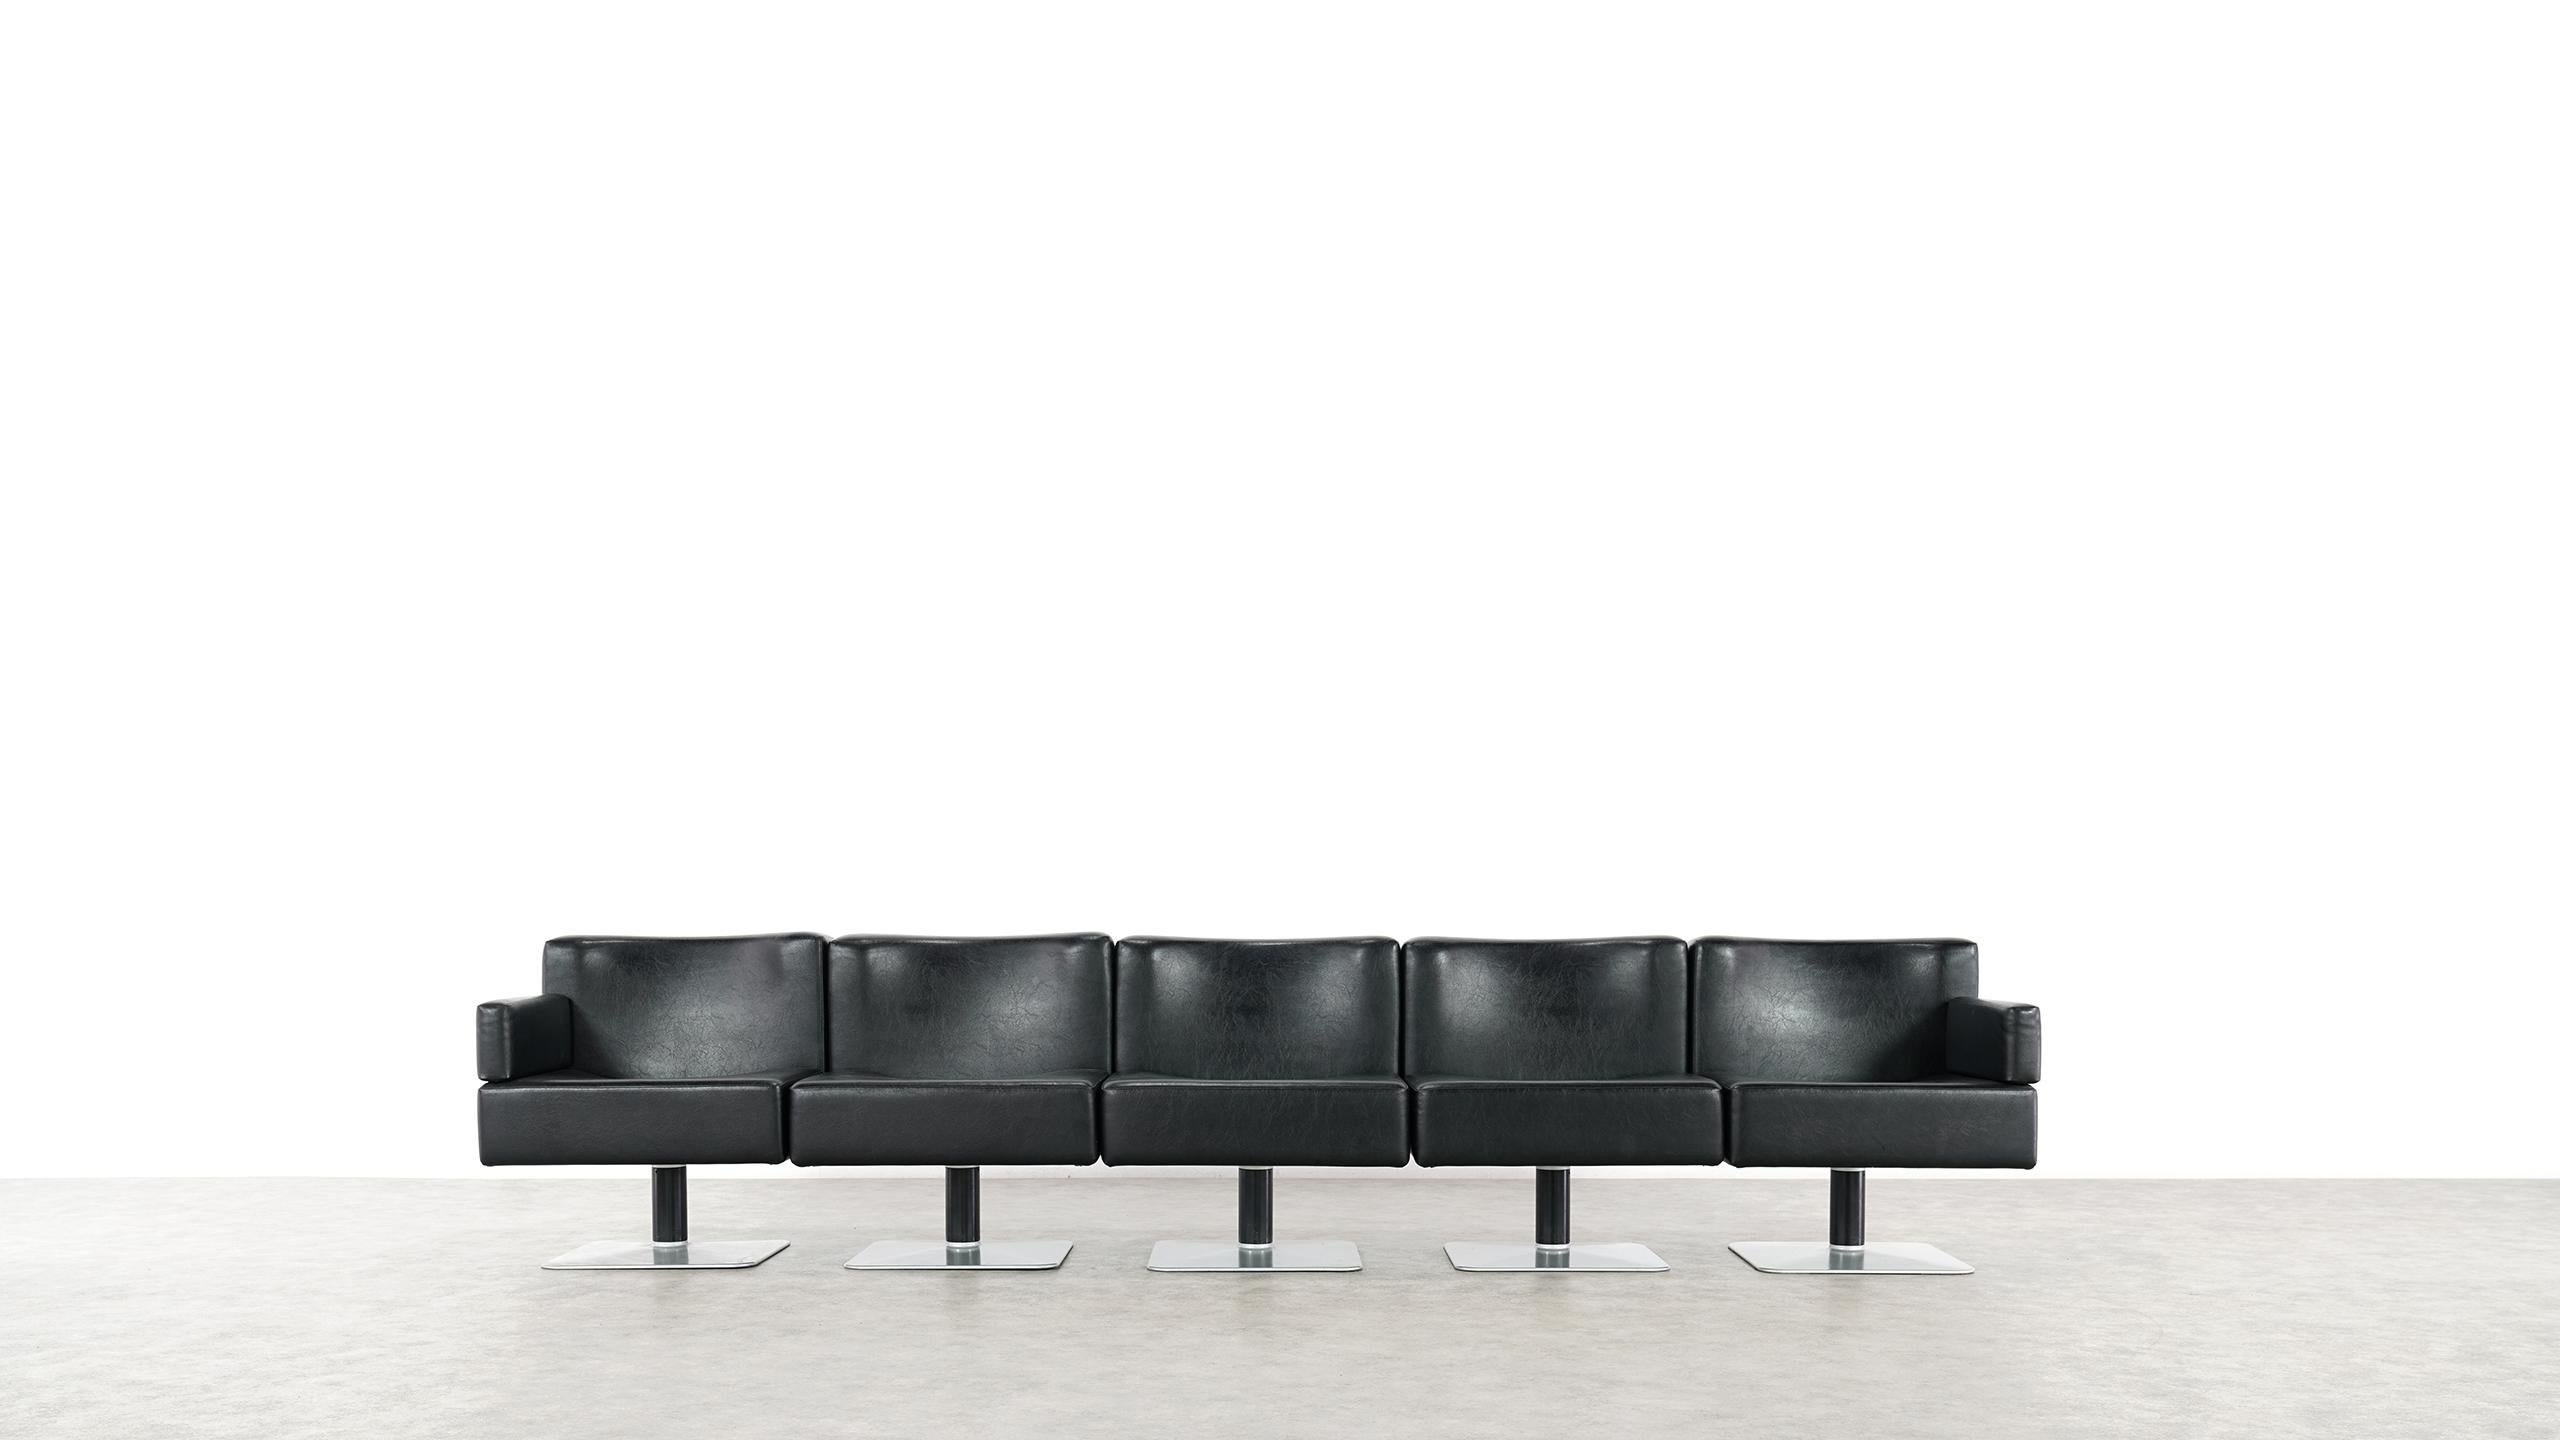 Modular Lounge Sofa or Chair or Table Set by Herbert Hirche 1974 Mauser, Germany 3